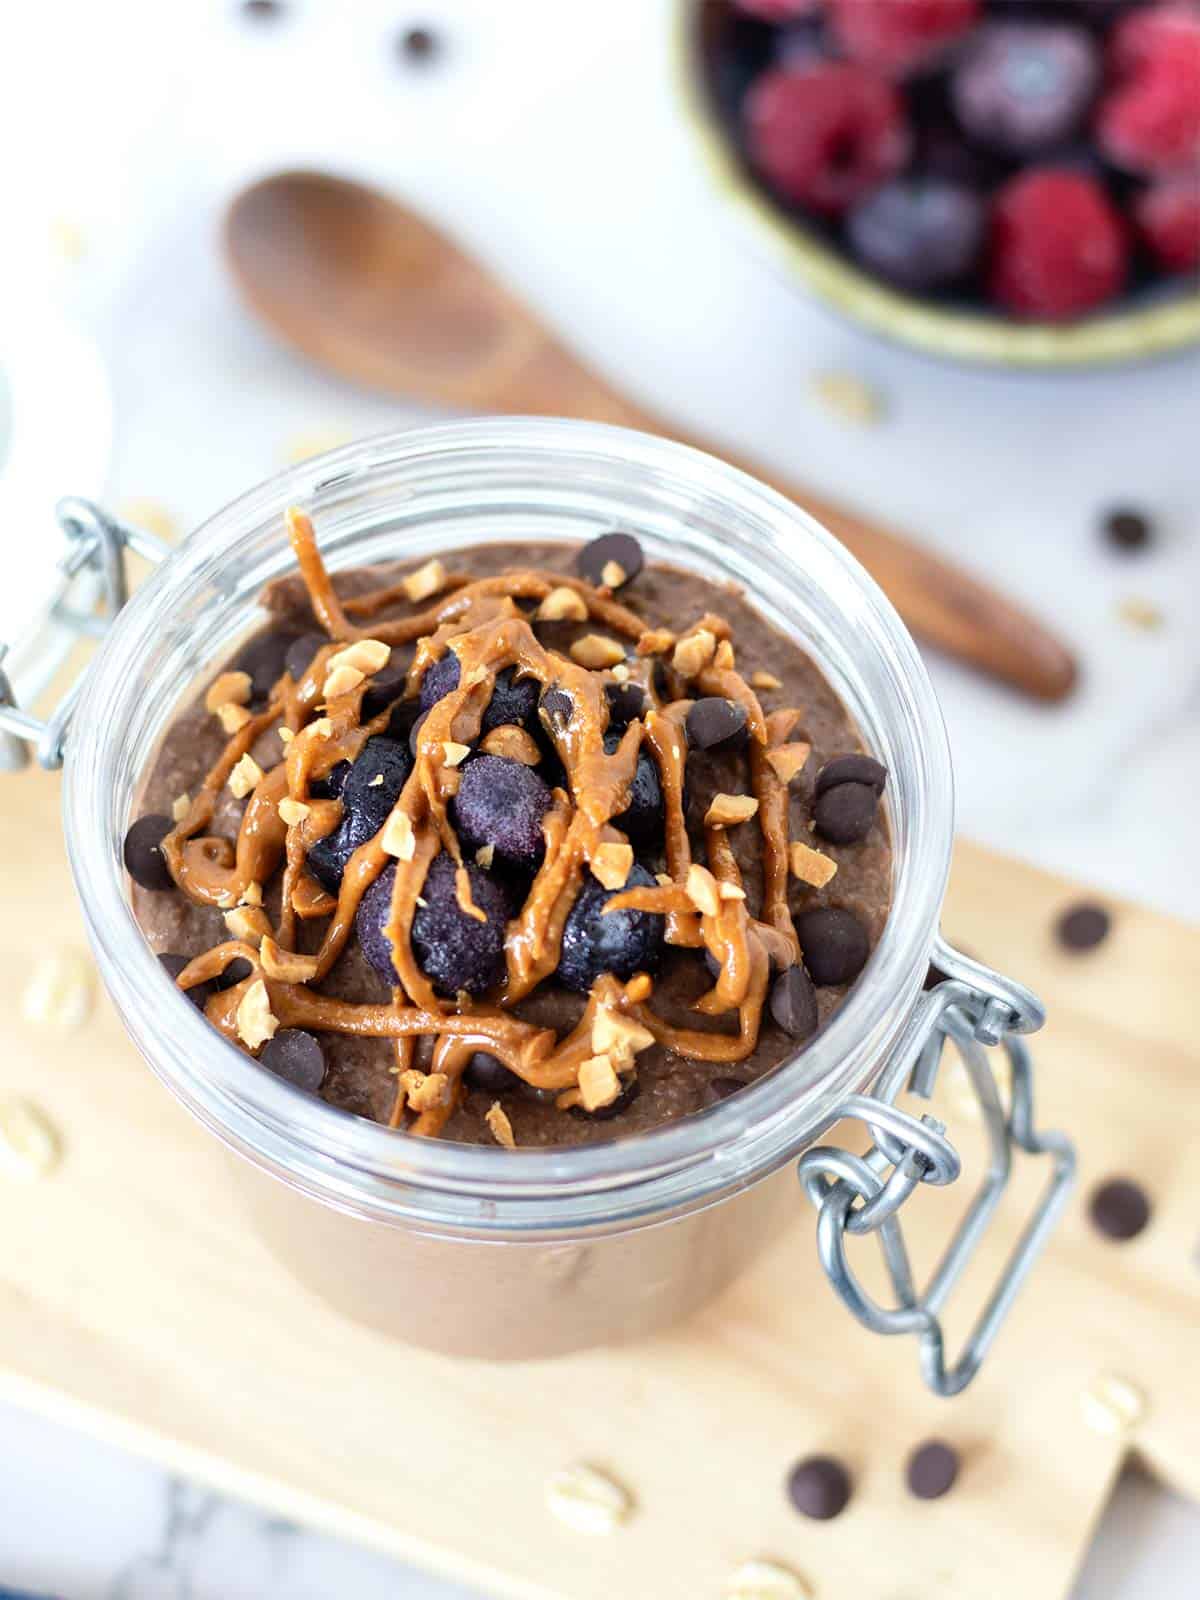 Chocolate Peanut Butter Blended Overnight Oats